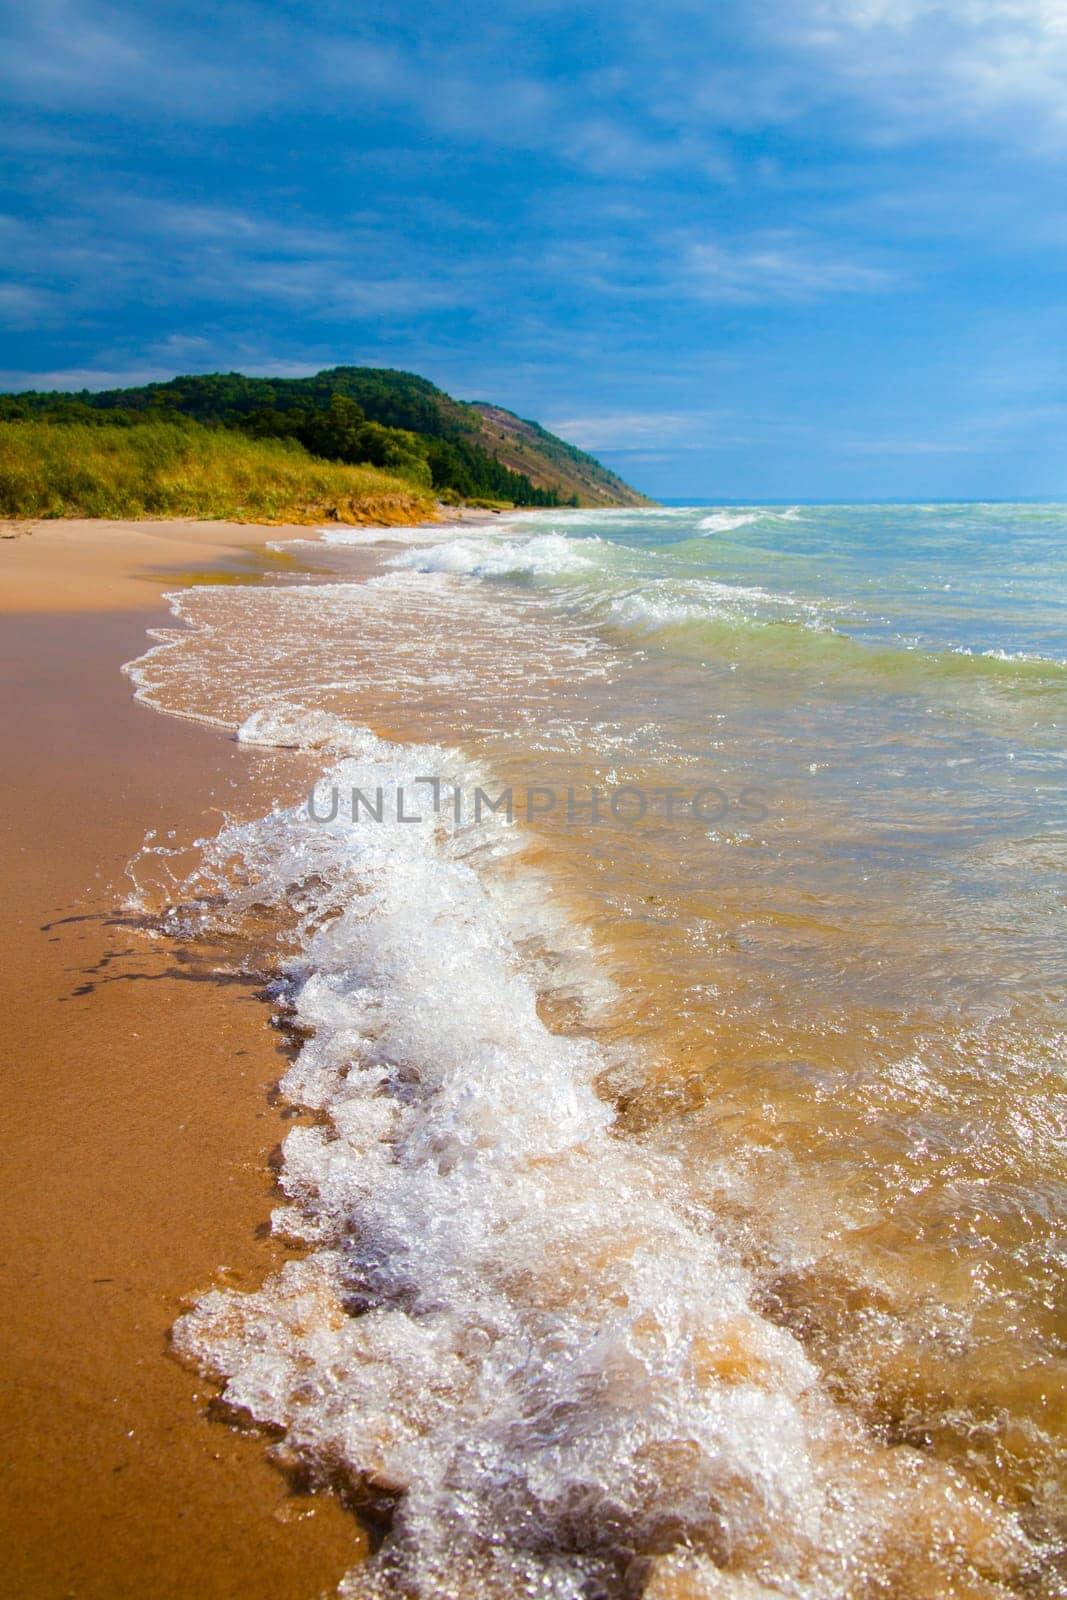 Tranquil beach scene with clear blue sky and vibrant sea. Low perspective captures gentle waves on golden sand. Lush greenery adorns bluff in background.